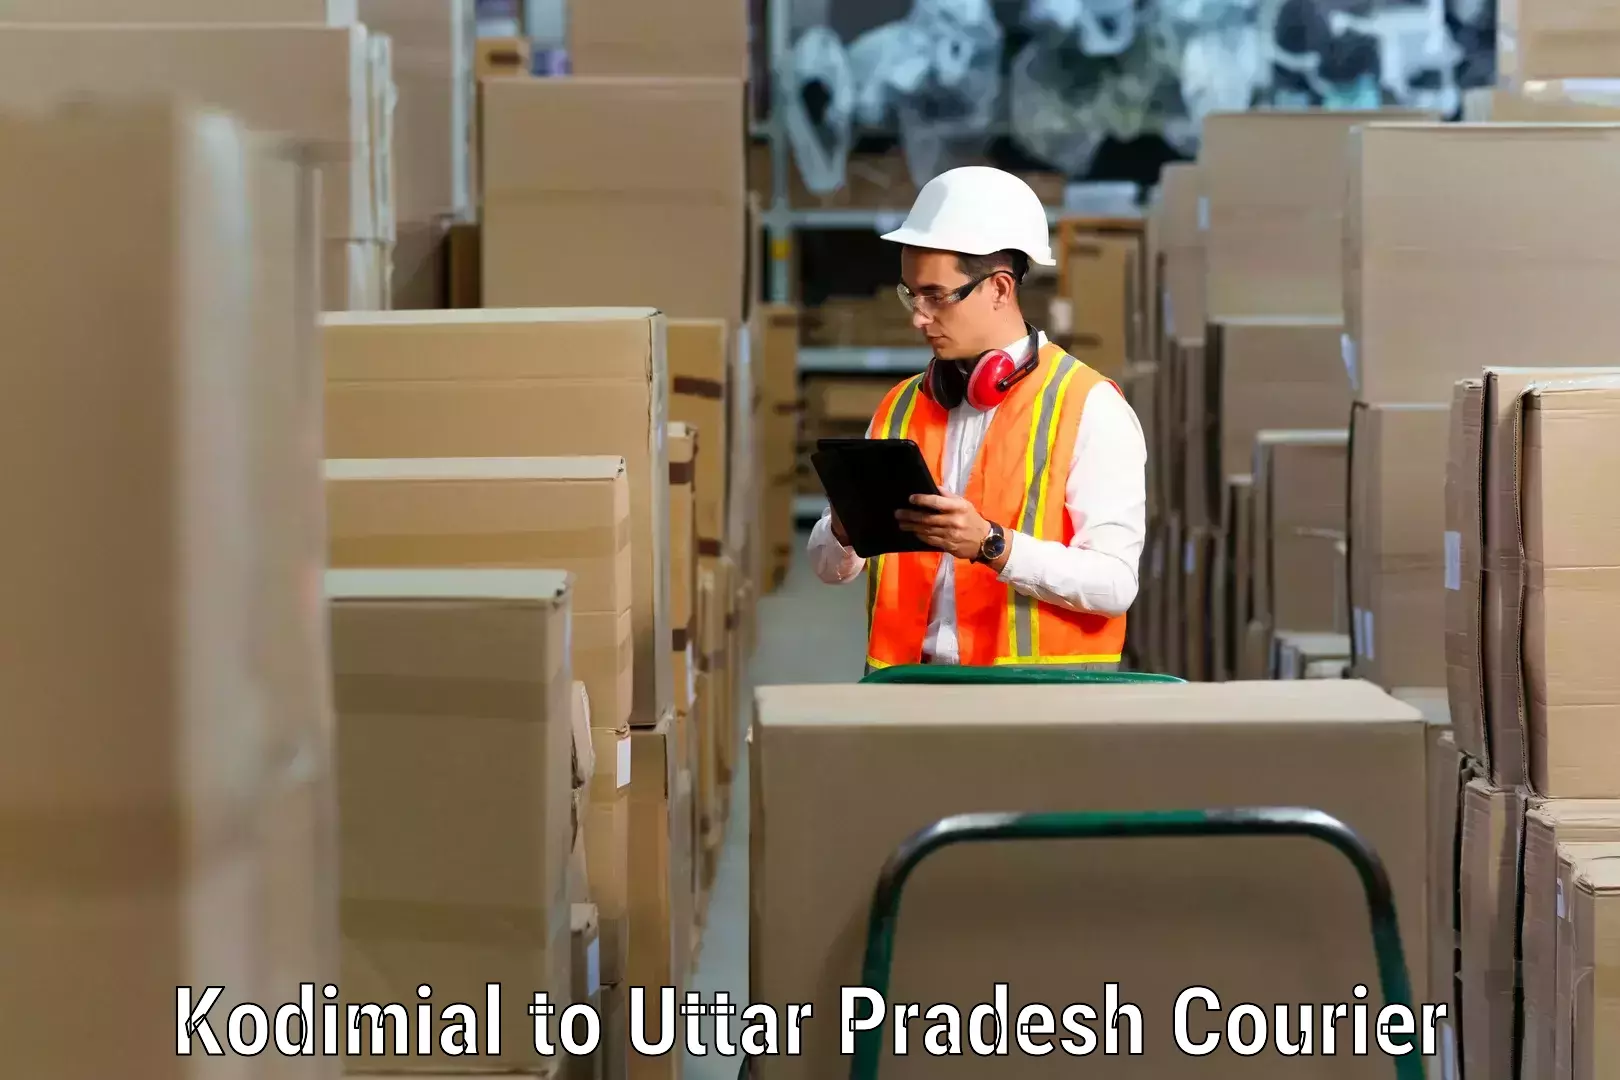 Expert packing and moving Kodimial to Kulpahar